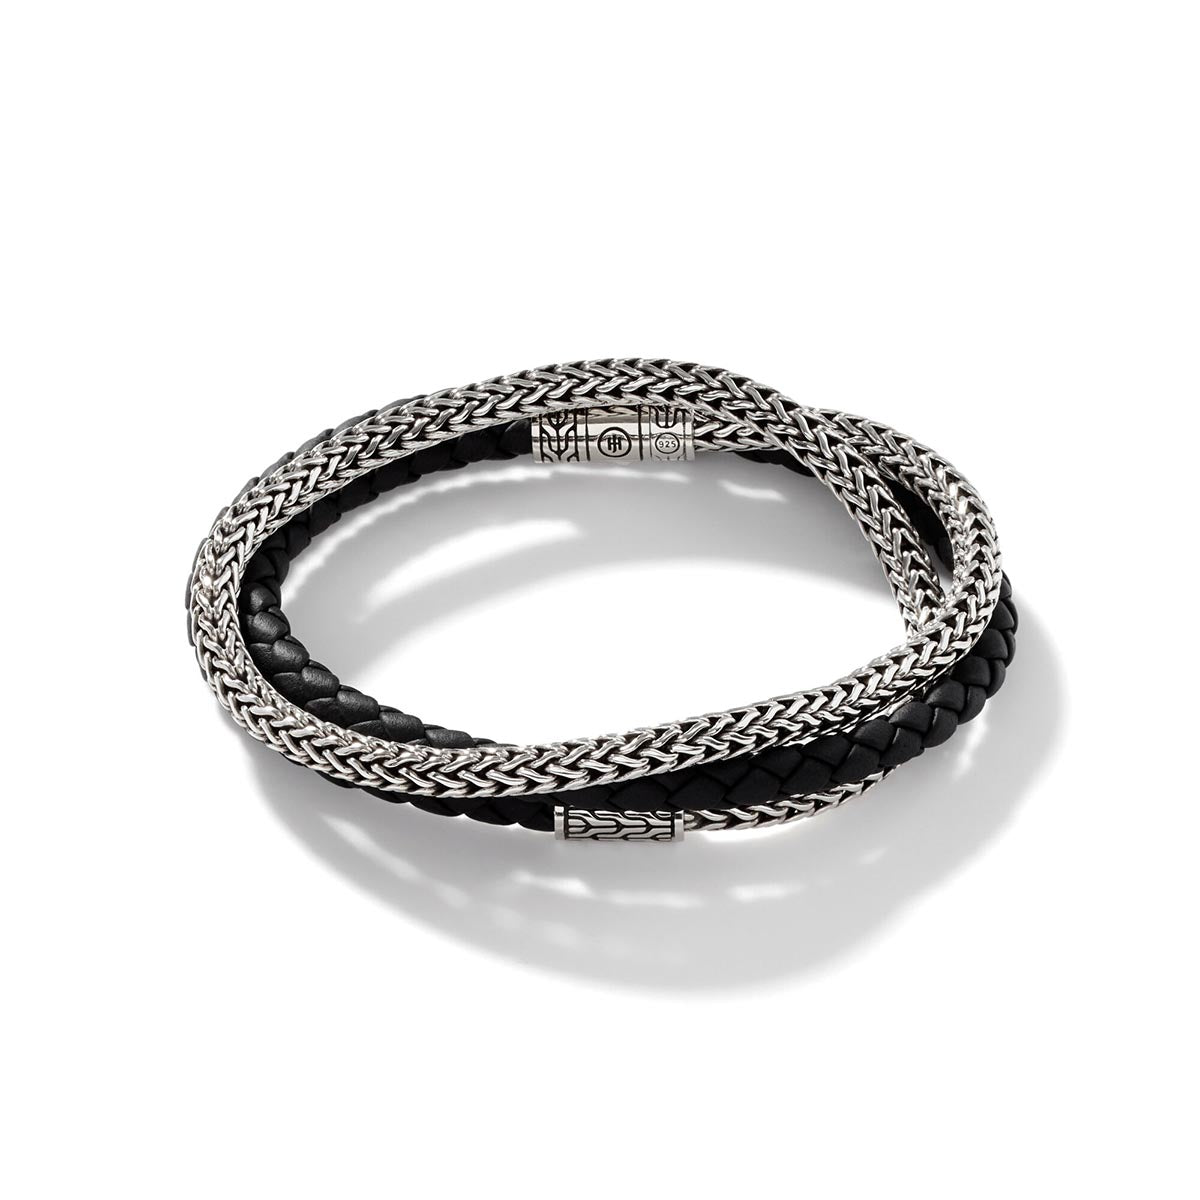 John Hardy Classic Chain Collection Mens Triple Wrap Bracelet in Black Leather and Sterling Silver